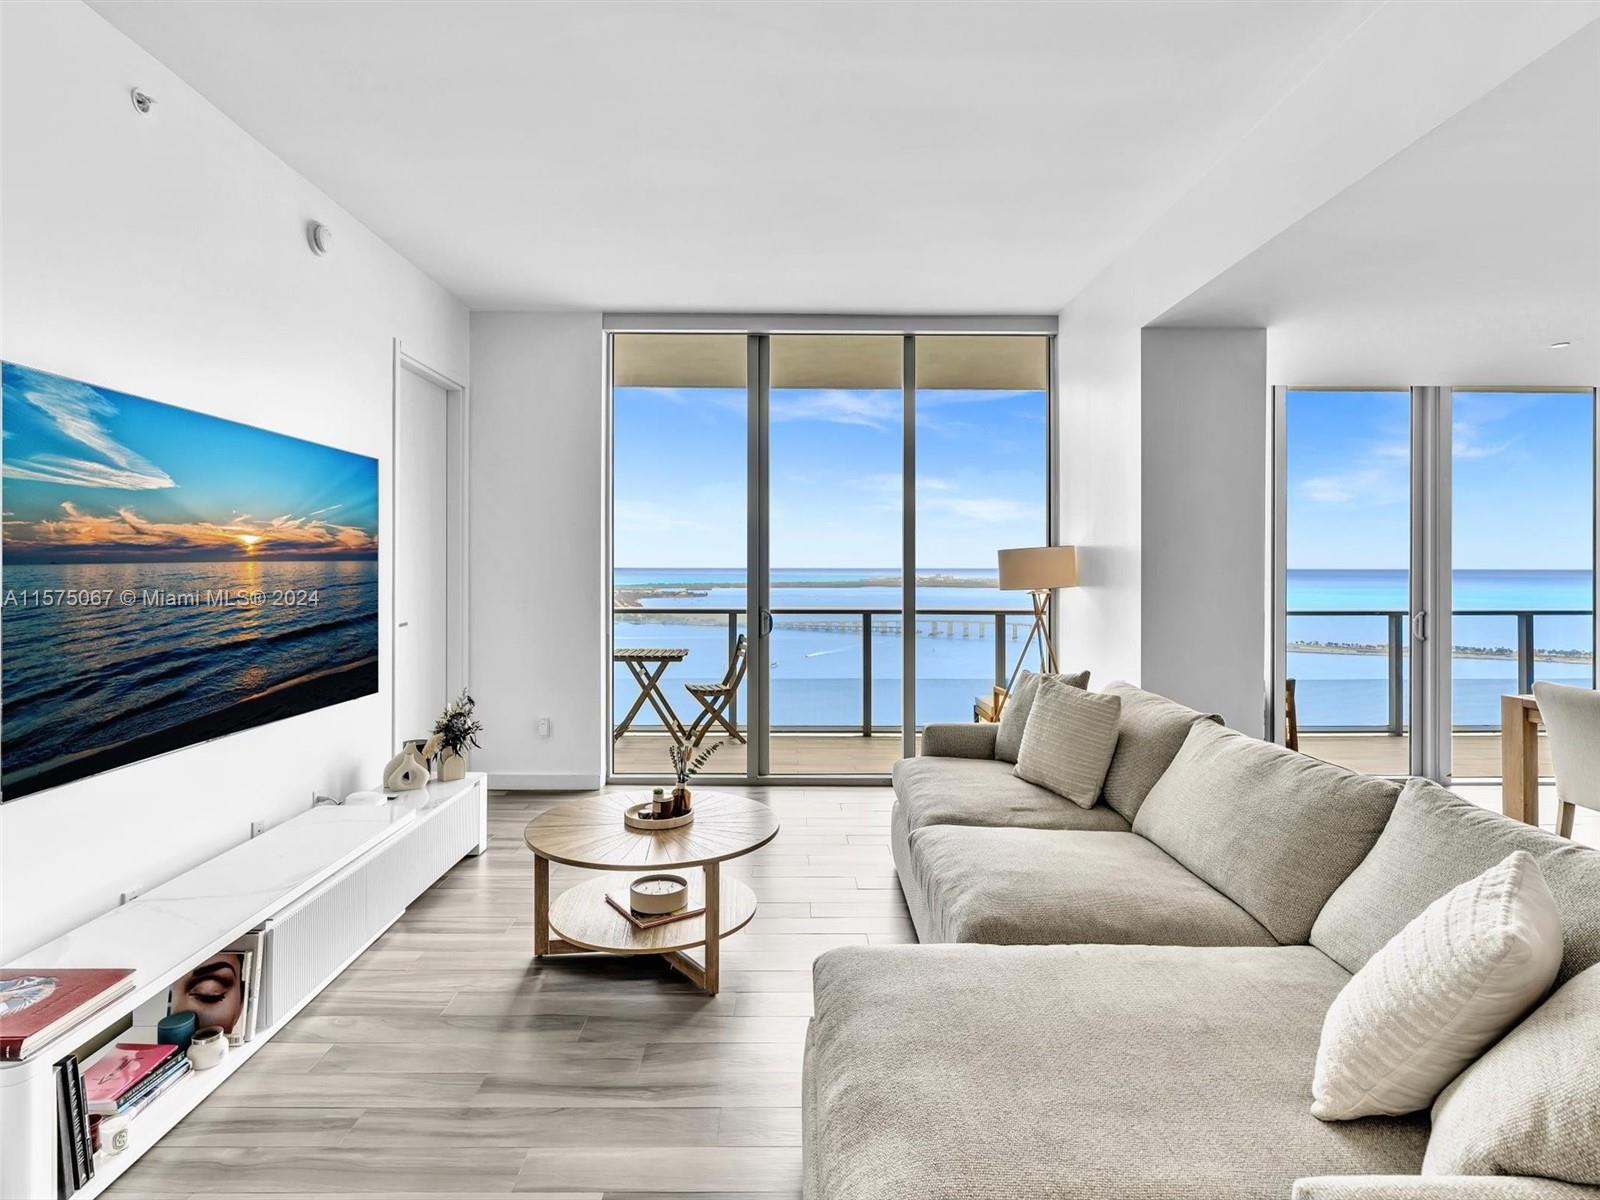 Step into luxury living with this fully furnished gem with direct views of Biscayne Bay. Located in a sought-after building in the quiet part of Brickell by the bay. The unit offers 2 bedrooms with walk-in closets, 3 full baths, and a den. Featuring an open layout and modern finishes throughout the unit. Residents enjoy access to a host of amenities including a gym, pool, Jacuzzi, sauna, and 24/7 concierge. Available now for a six-month lease!